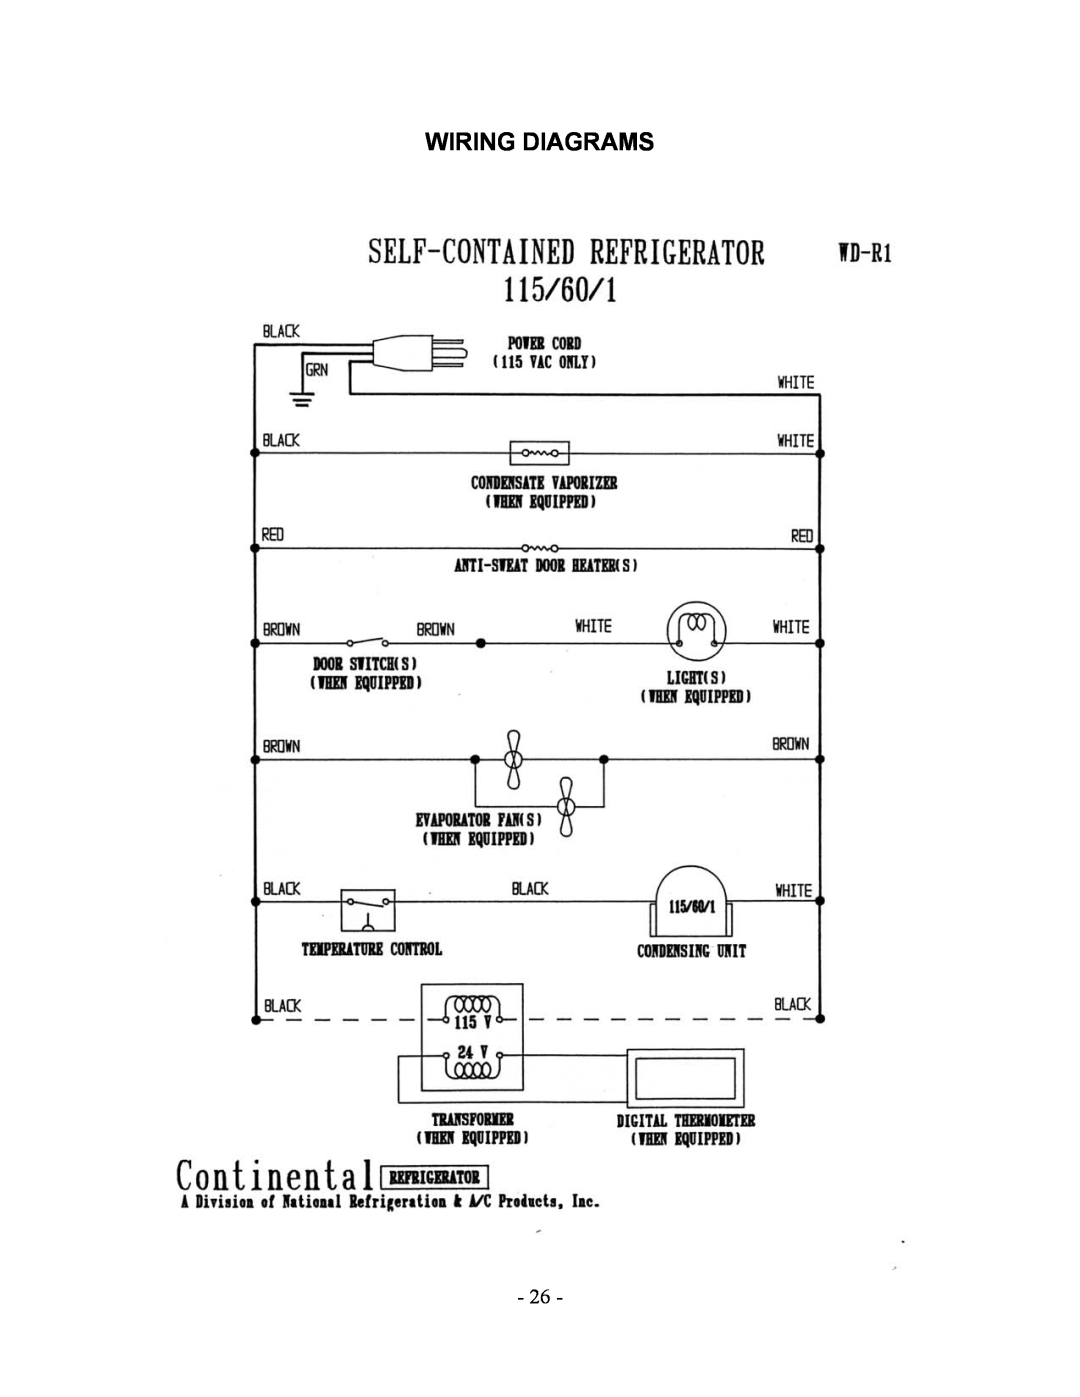 Bally Refrigerated Boxes Refrigerators/Freezers/Warmers manual Wiring Diagrams 